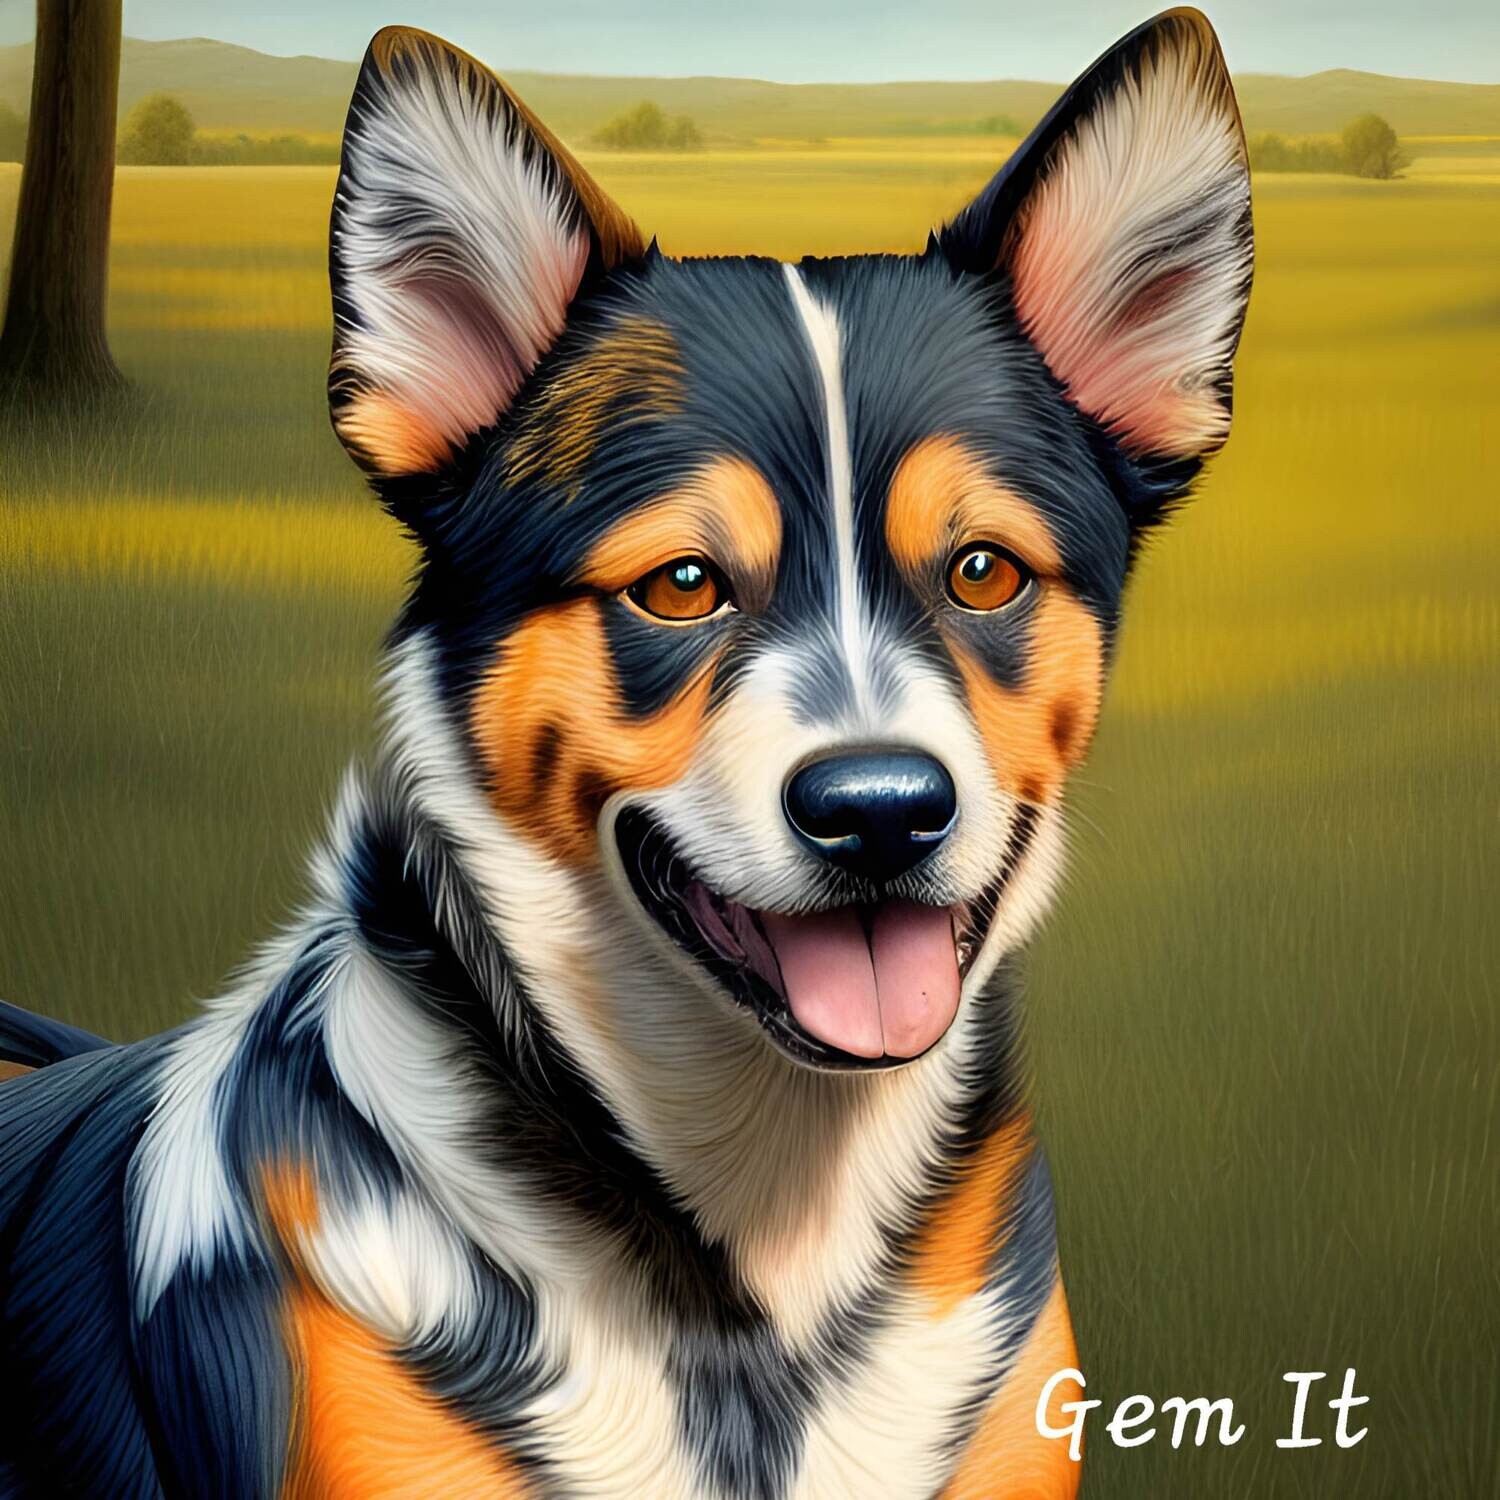 Cattle Dog 390 - Full Drill Diamond Painting - Specially ordered for you. Delivery is approximately 4 - 6 weeks.